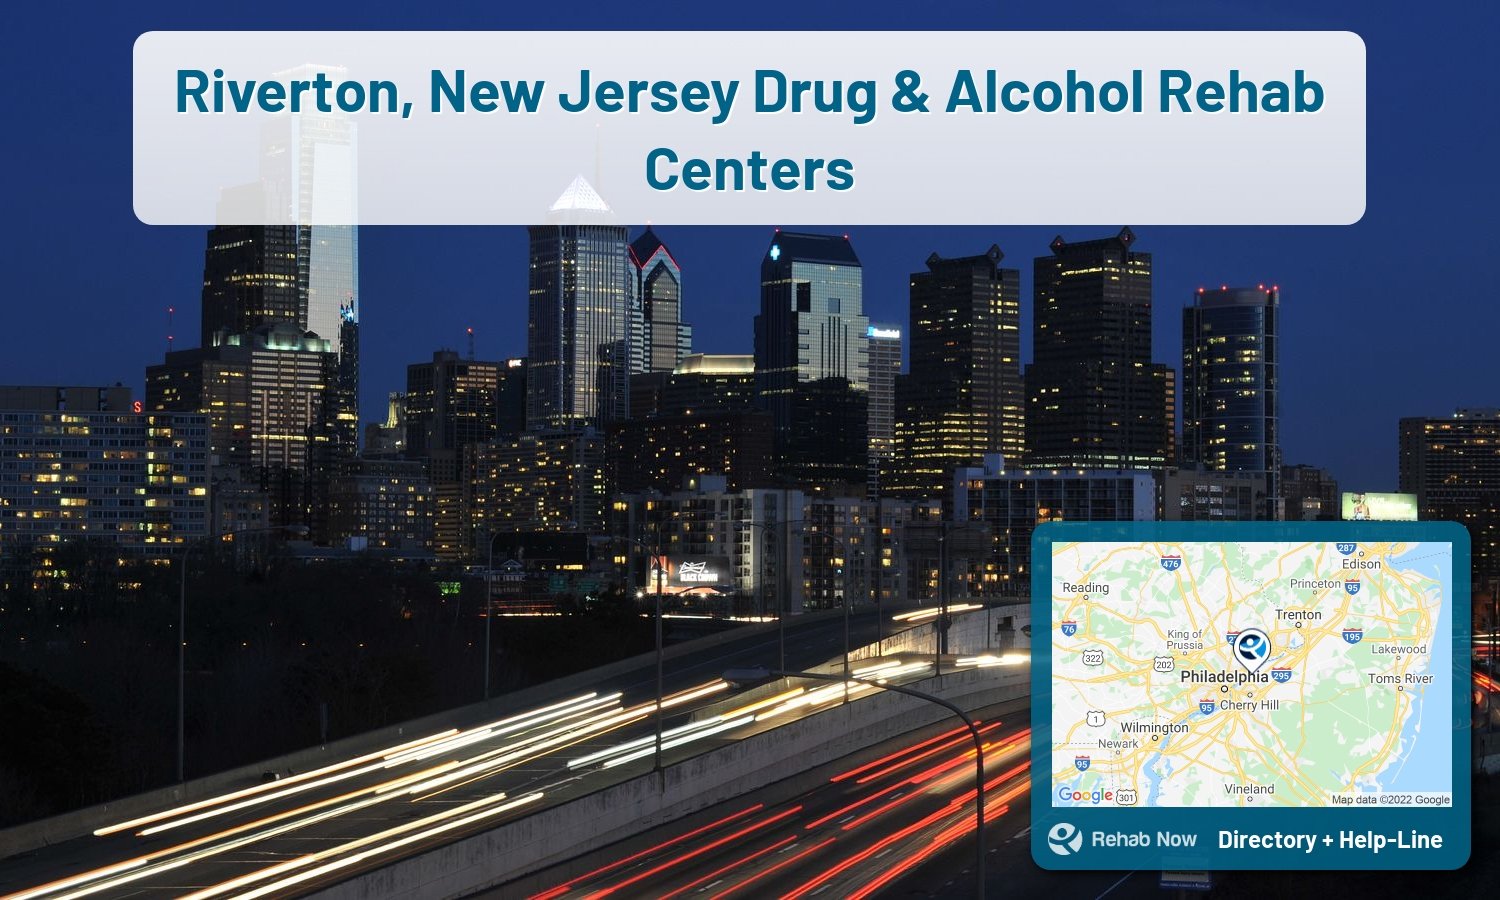 Need treatment nearby in Riverton, New Jersey? Choose a drug/alcohol rehab center from our list, or call our hotline now for free help.